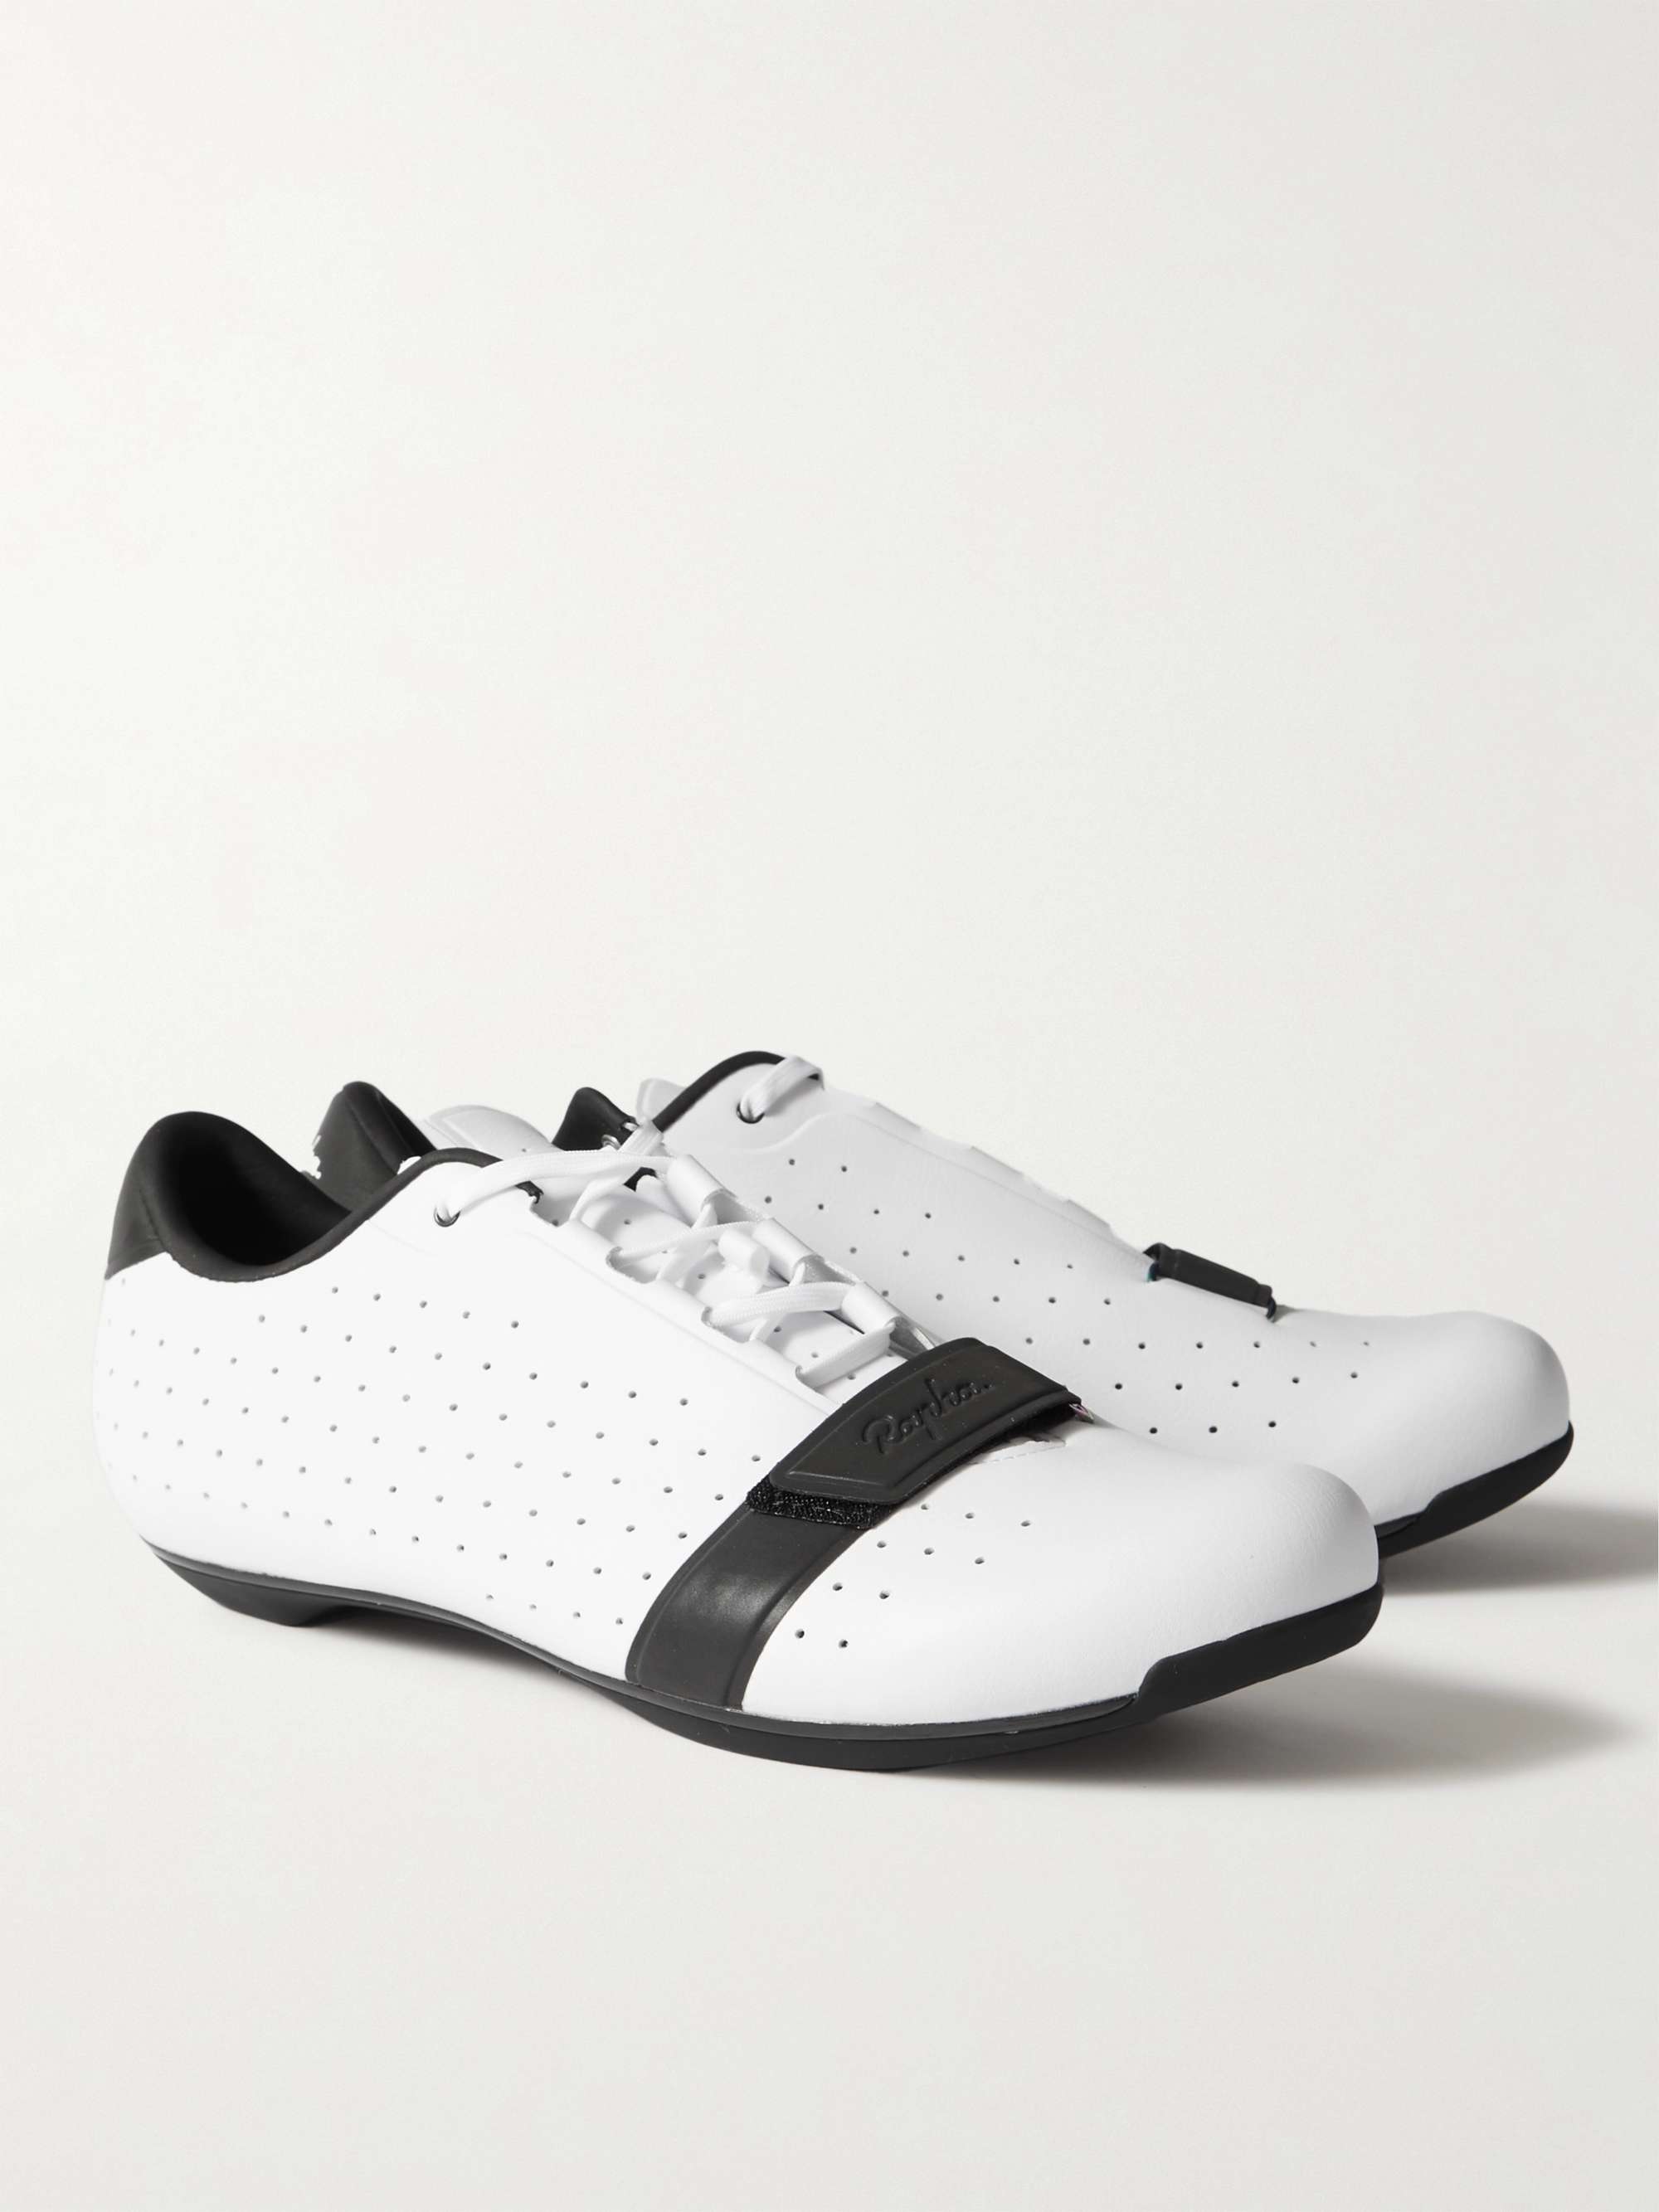 RAPHA Classic Cycling Shoes